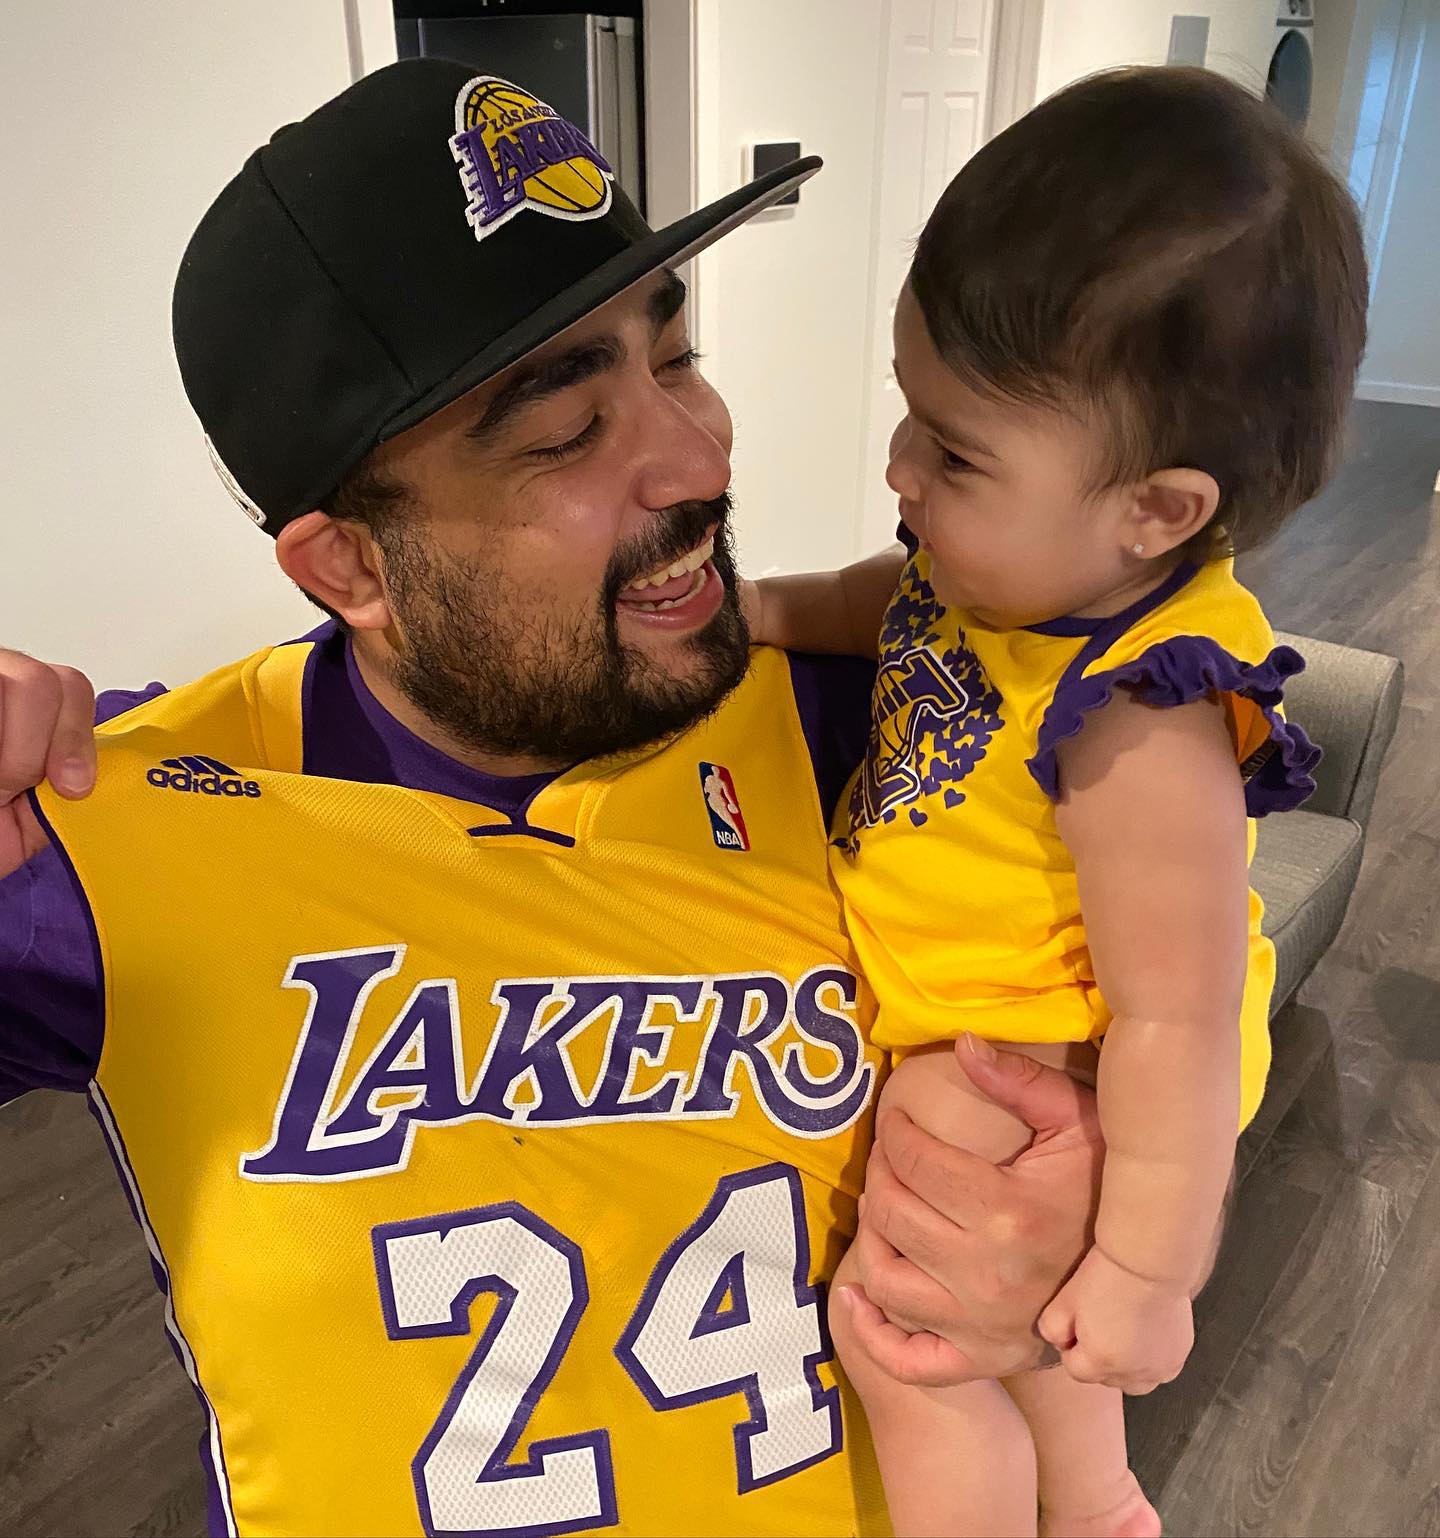 I said to Mila, Lakers in 5! 

Let’s go Lakers! Let’s get this W tonight ⁣
.⁣
.⁣
.⁣
.⁣
.⁣